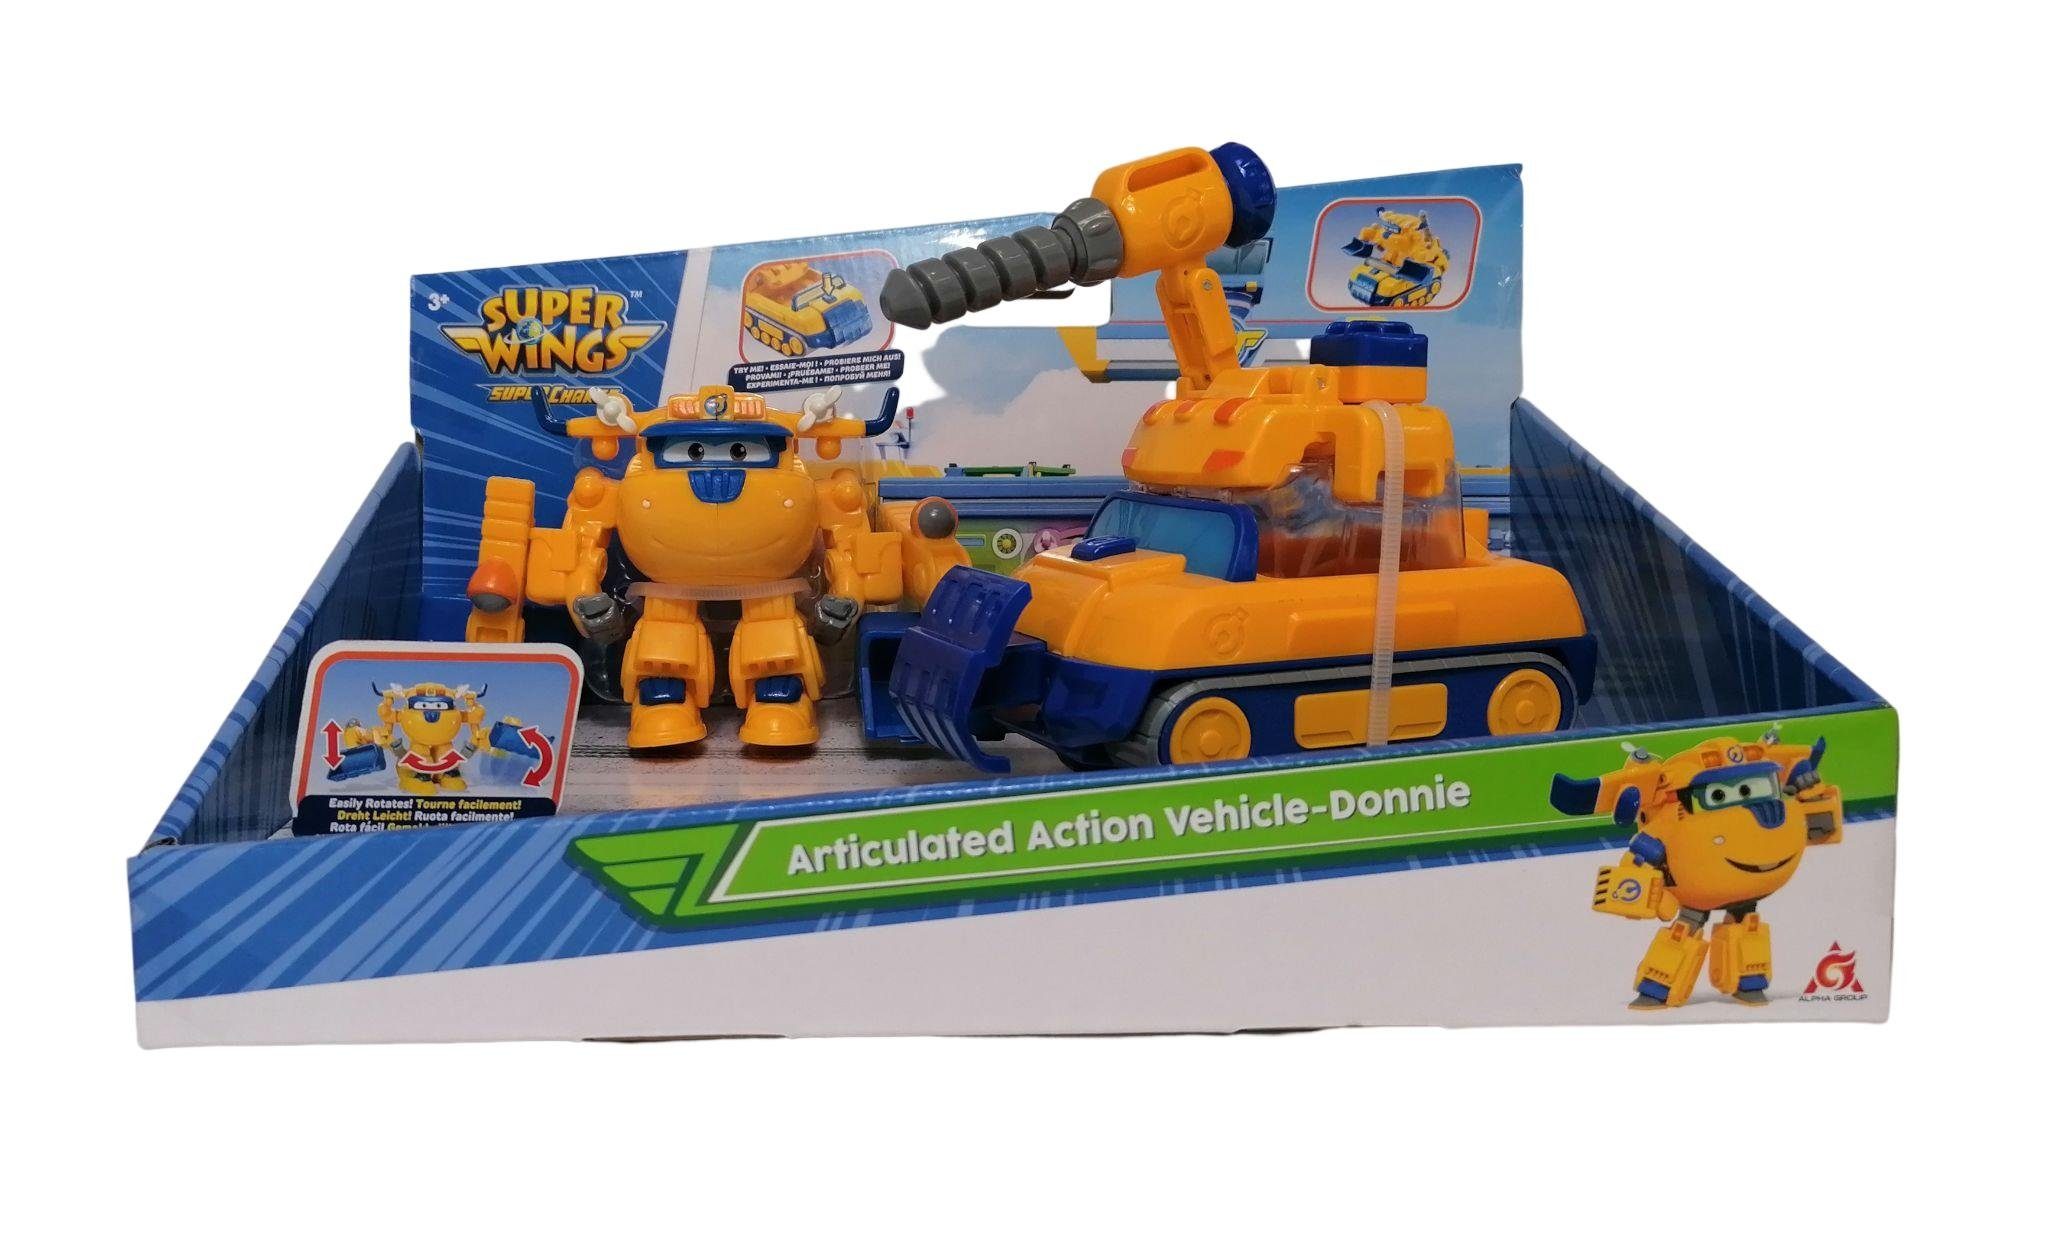 VaGo-Tools Vago®-Toys Actionfigur Super Wings Articulated Action Vehicle-Donnie, (Stück)